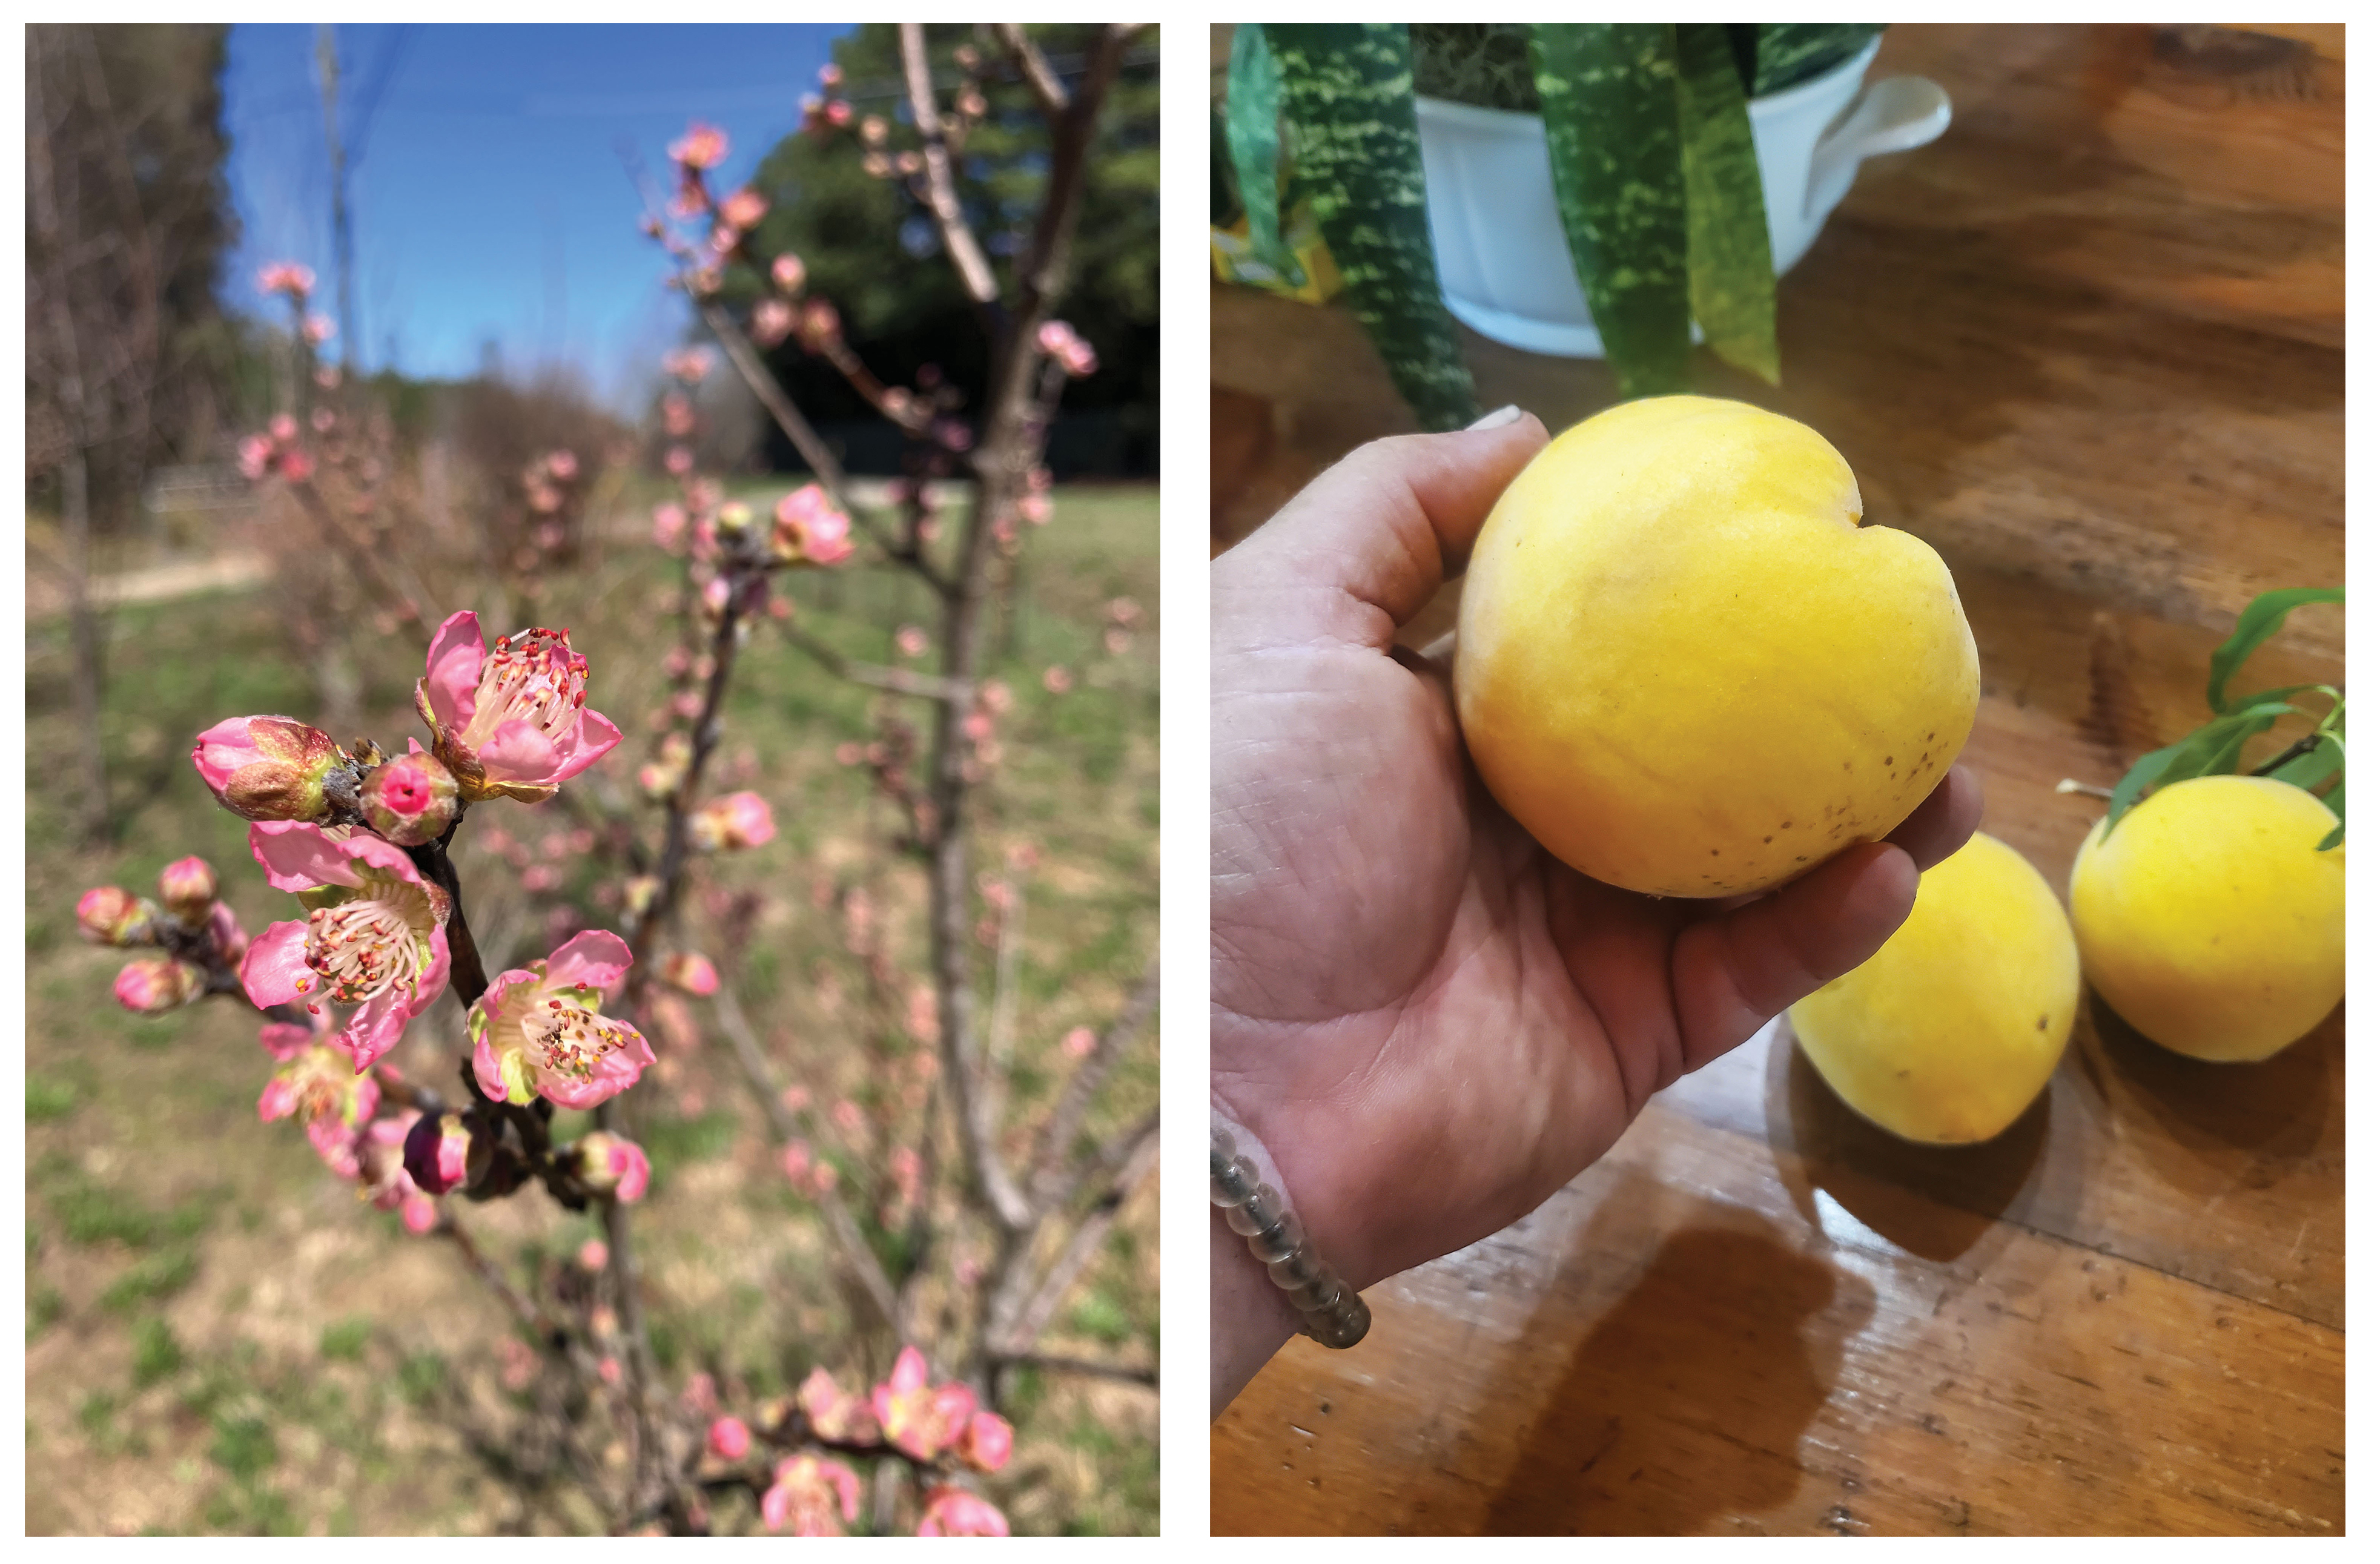 A lemon cling tree blooms in the home garden of Columbia horticulturalist Keith Mearns; (right) Rodger’s Heirlooms, an orchard near Columbia, has had success with fruiting.